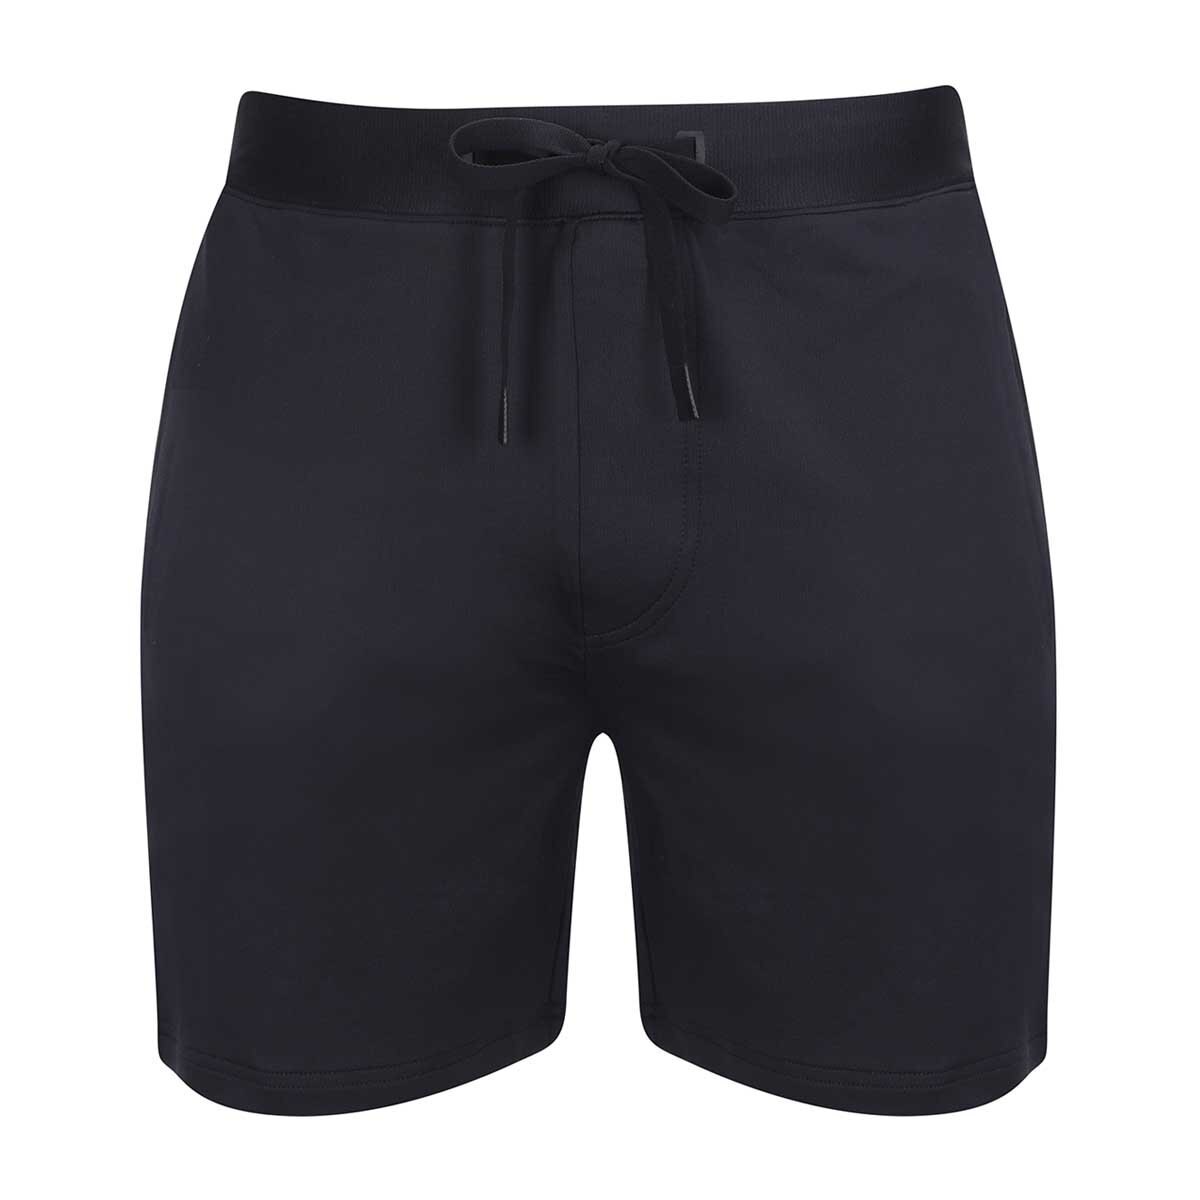 Short For Intelligent Trainers para Hombre